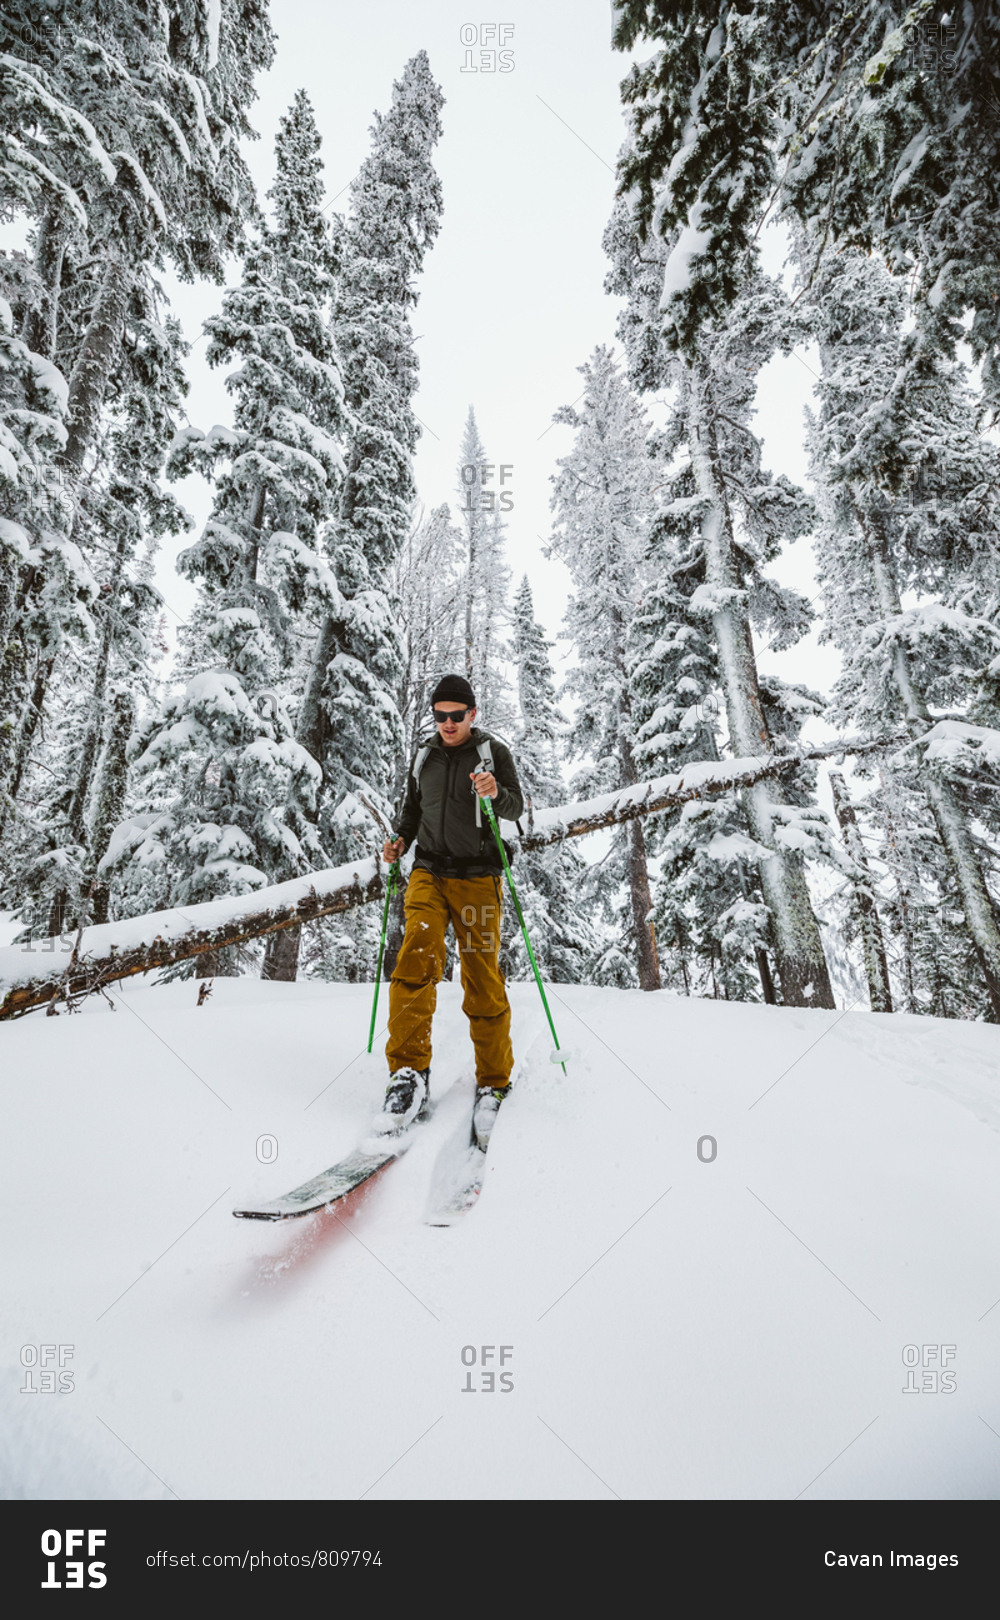 Lone skier comes out the trees during a winter adventure